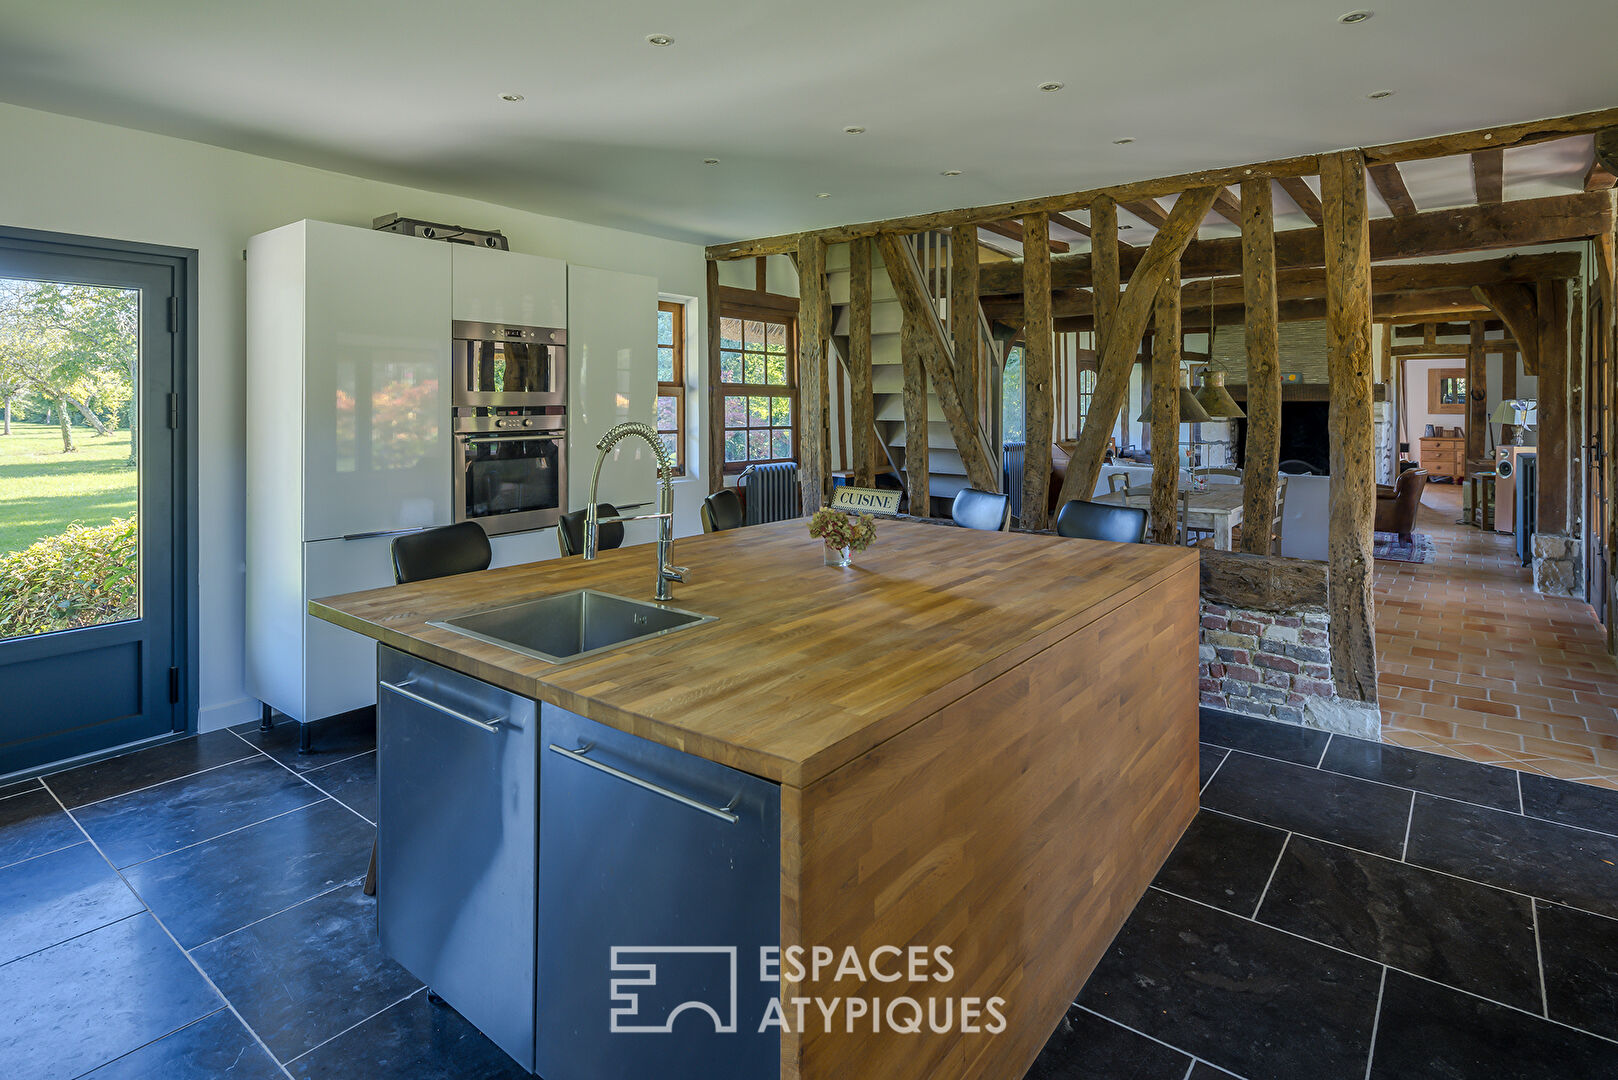 Renovated cottage on the banks of the Seine and its 3 outbuildings on its wooded park